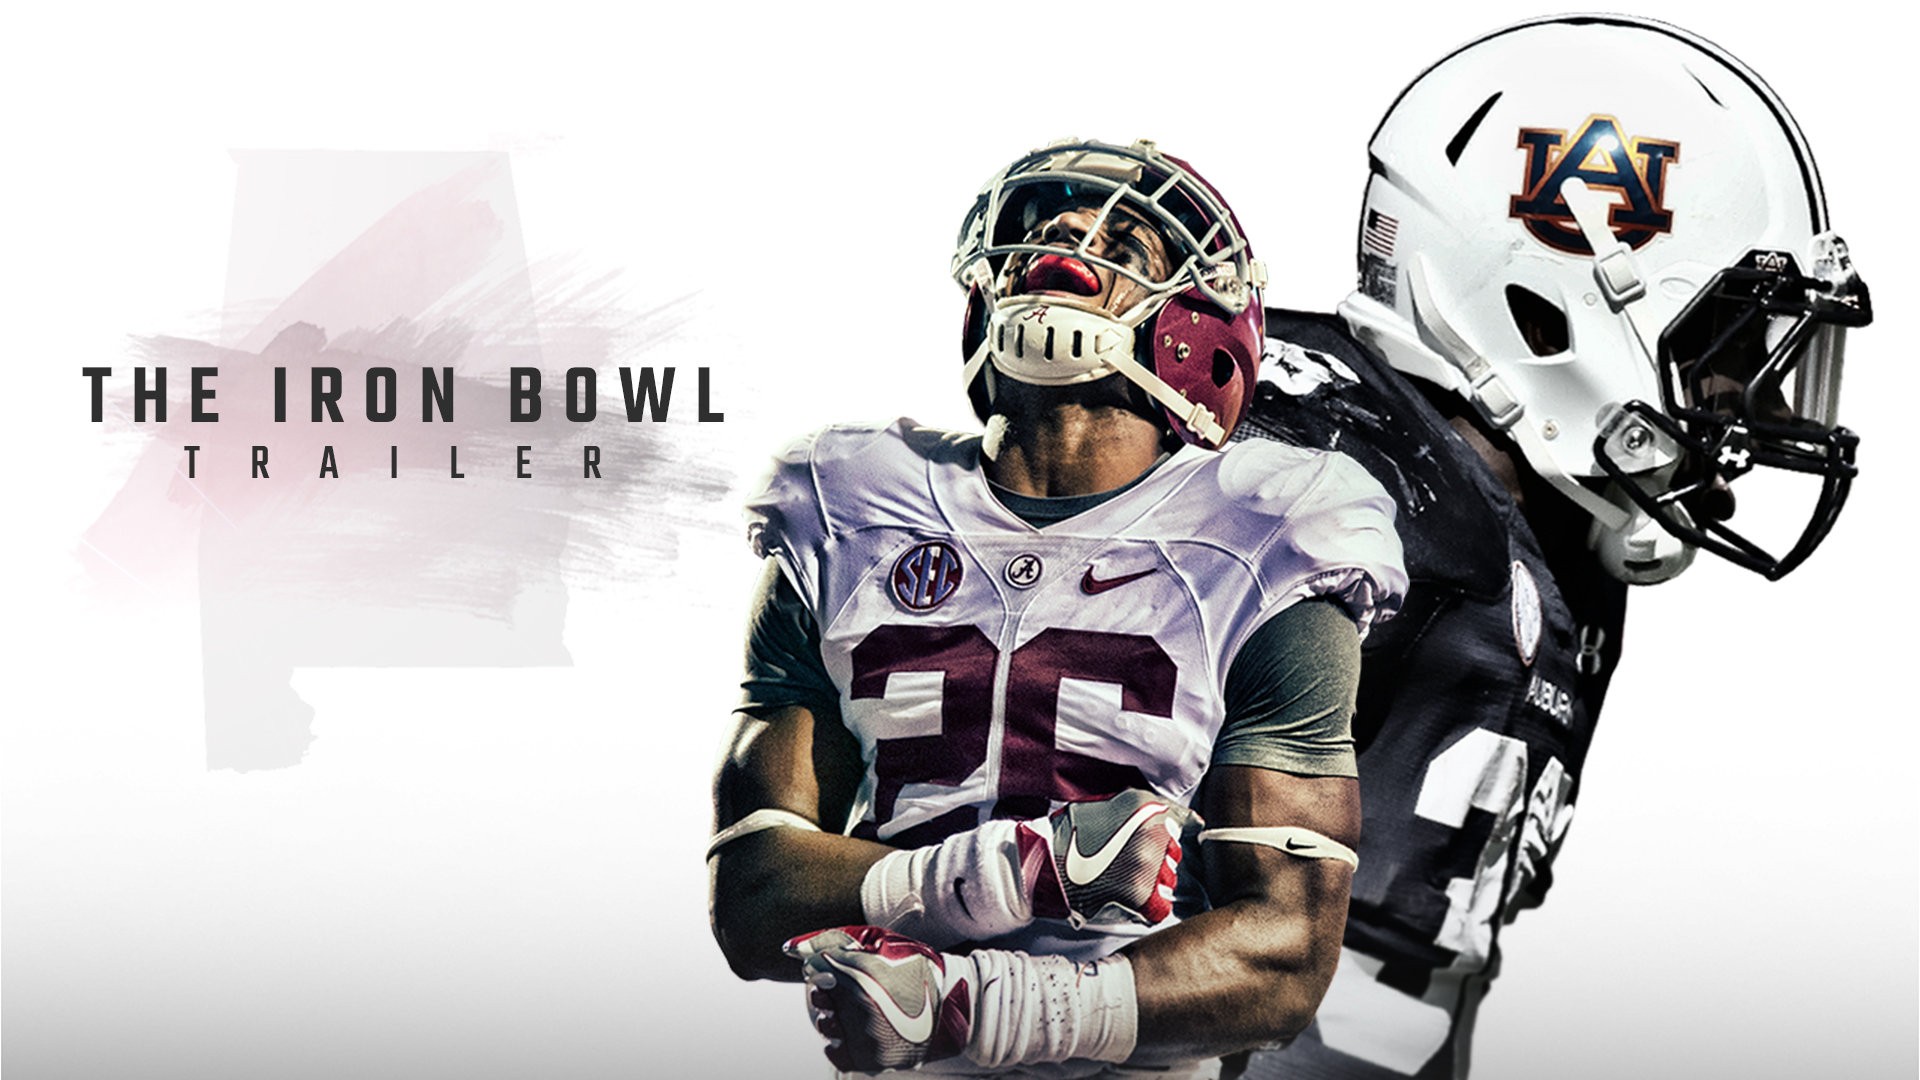 Get ready for the Iron Bowl with this incredible trailer